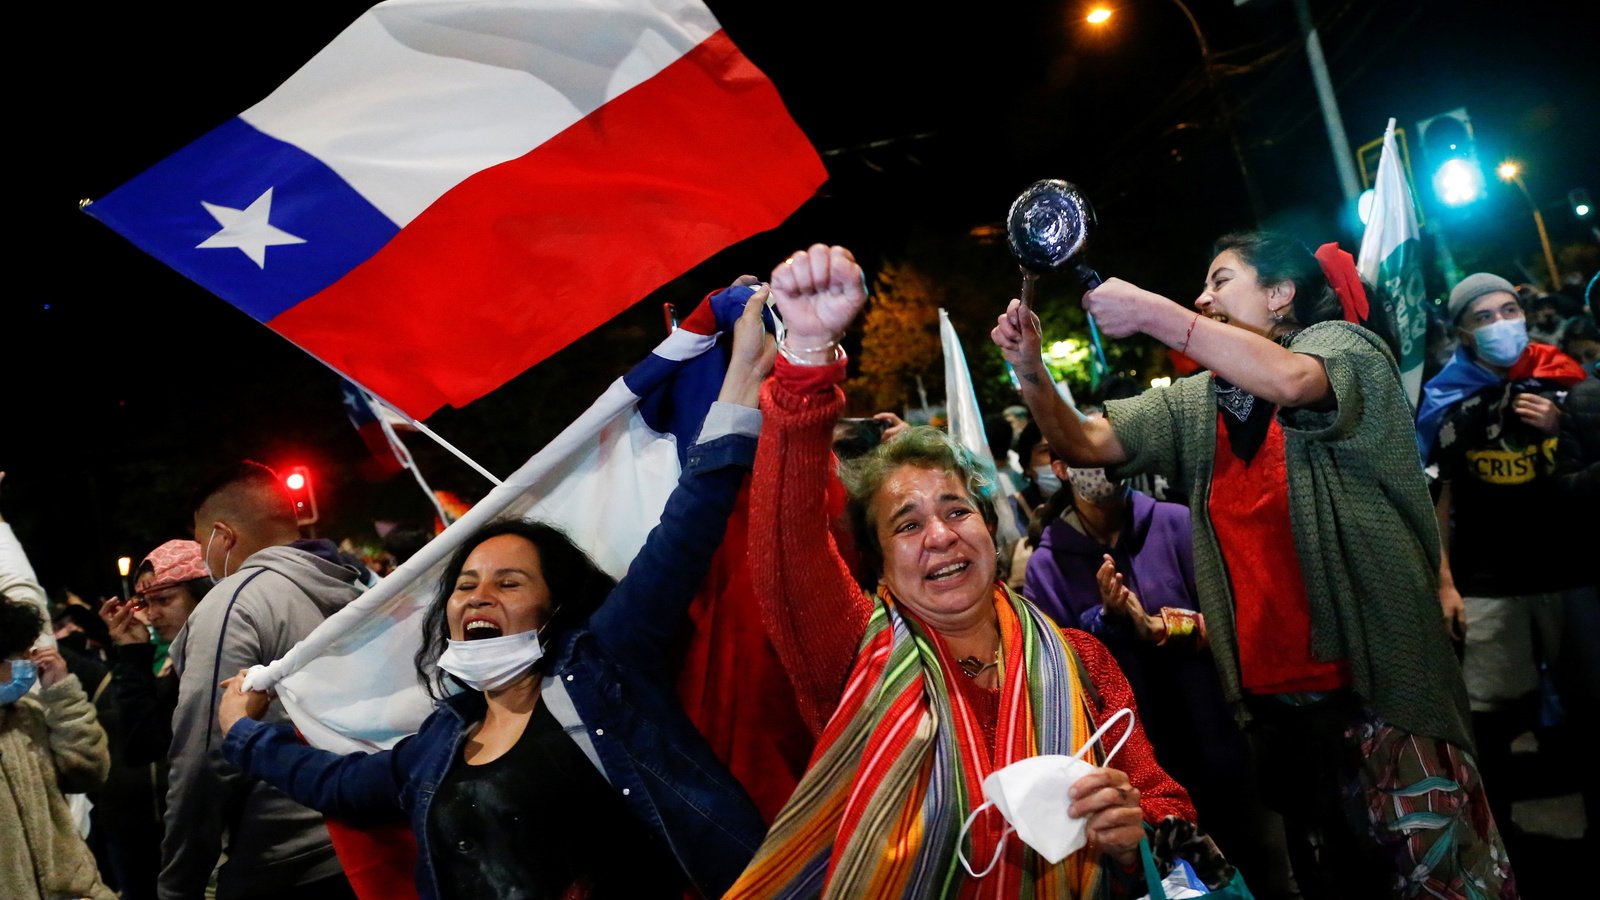 Chile rejects proposed pro-abortion constitution in landslide victory for life